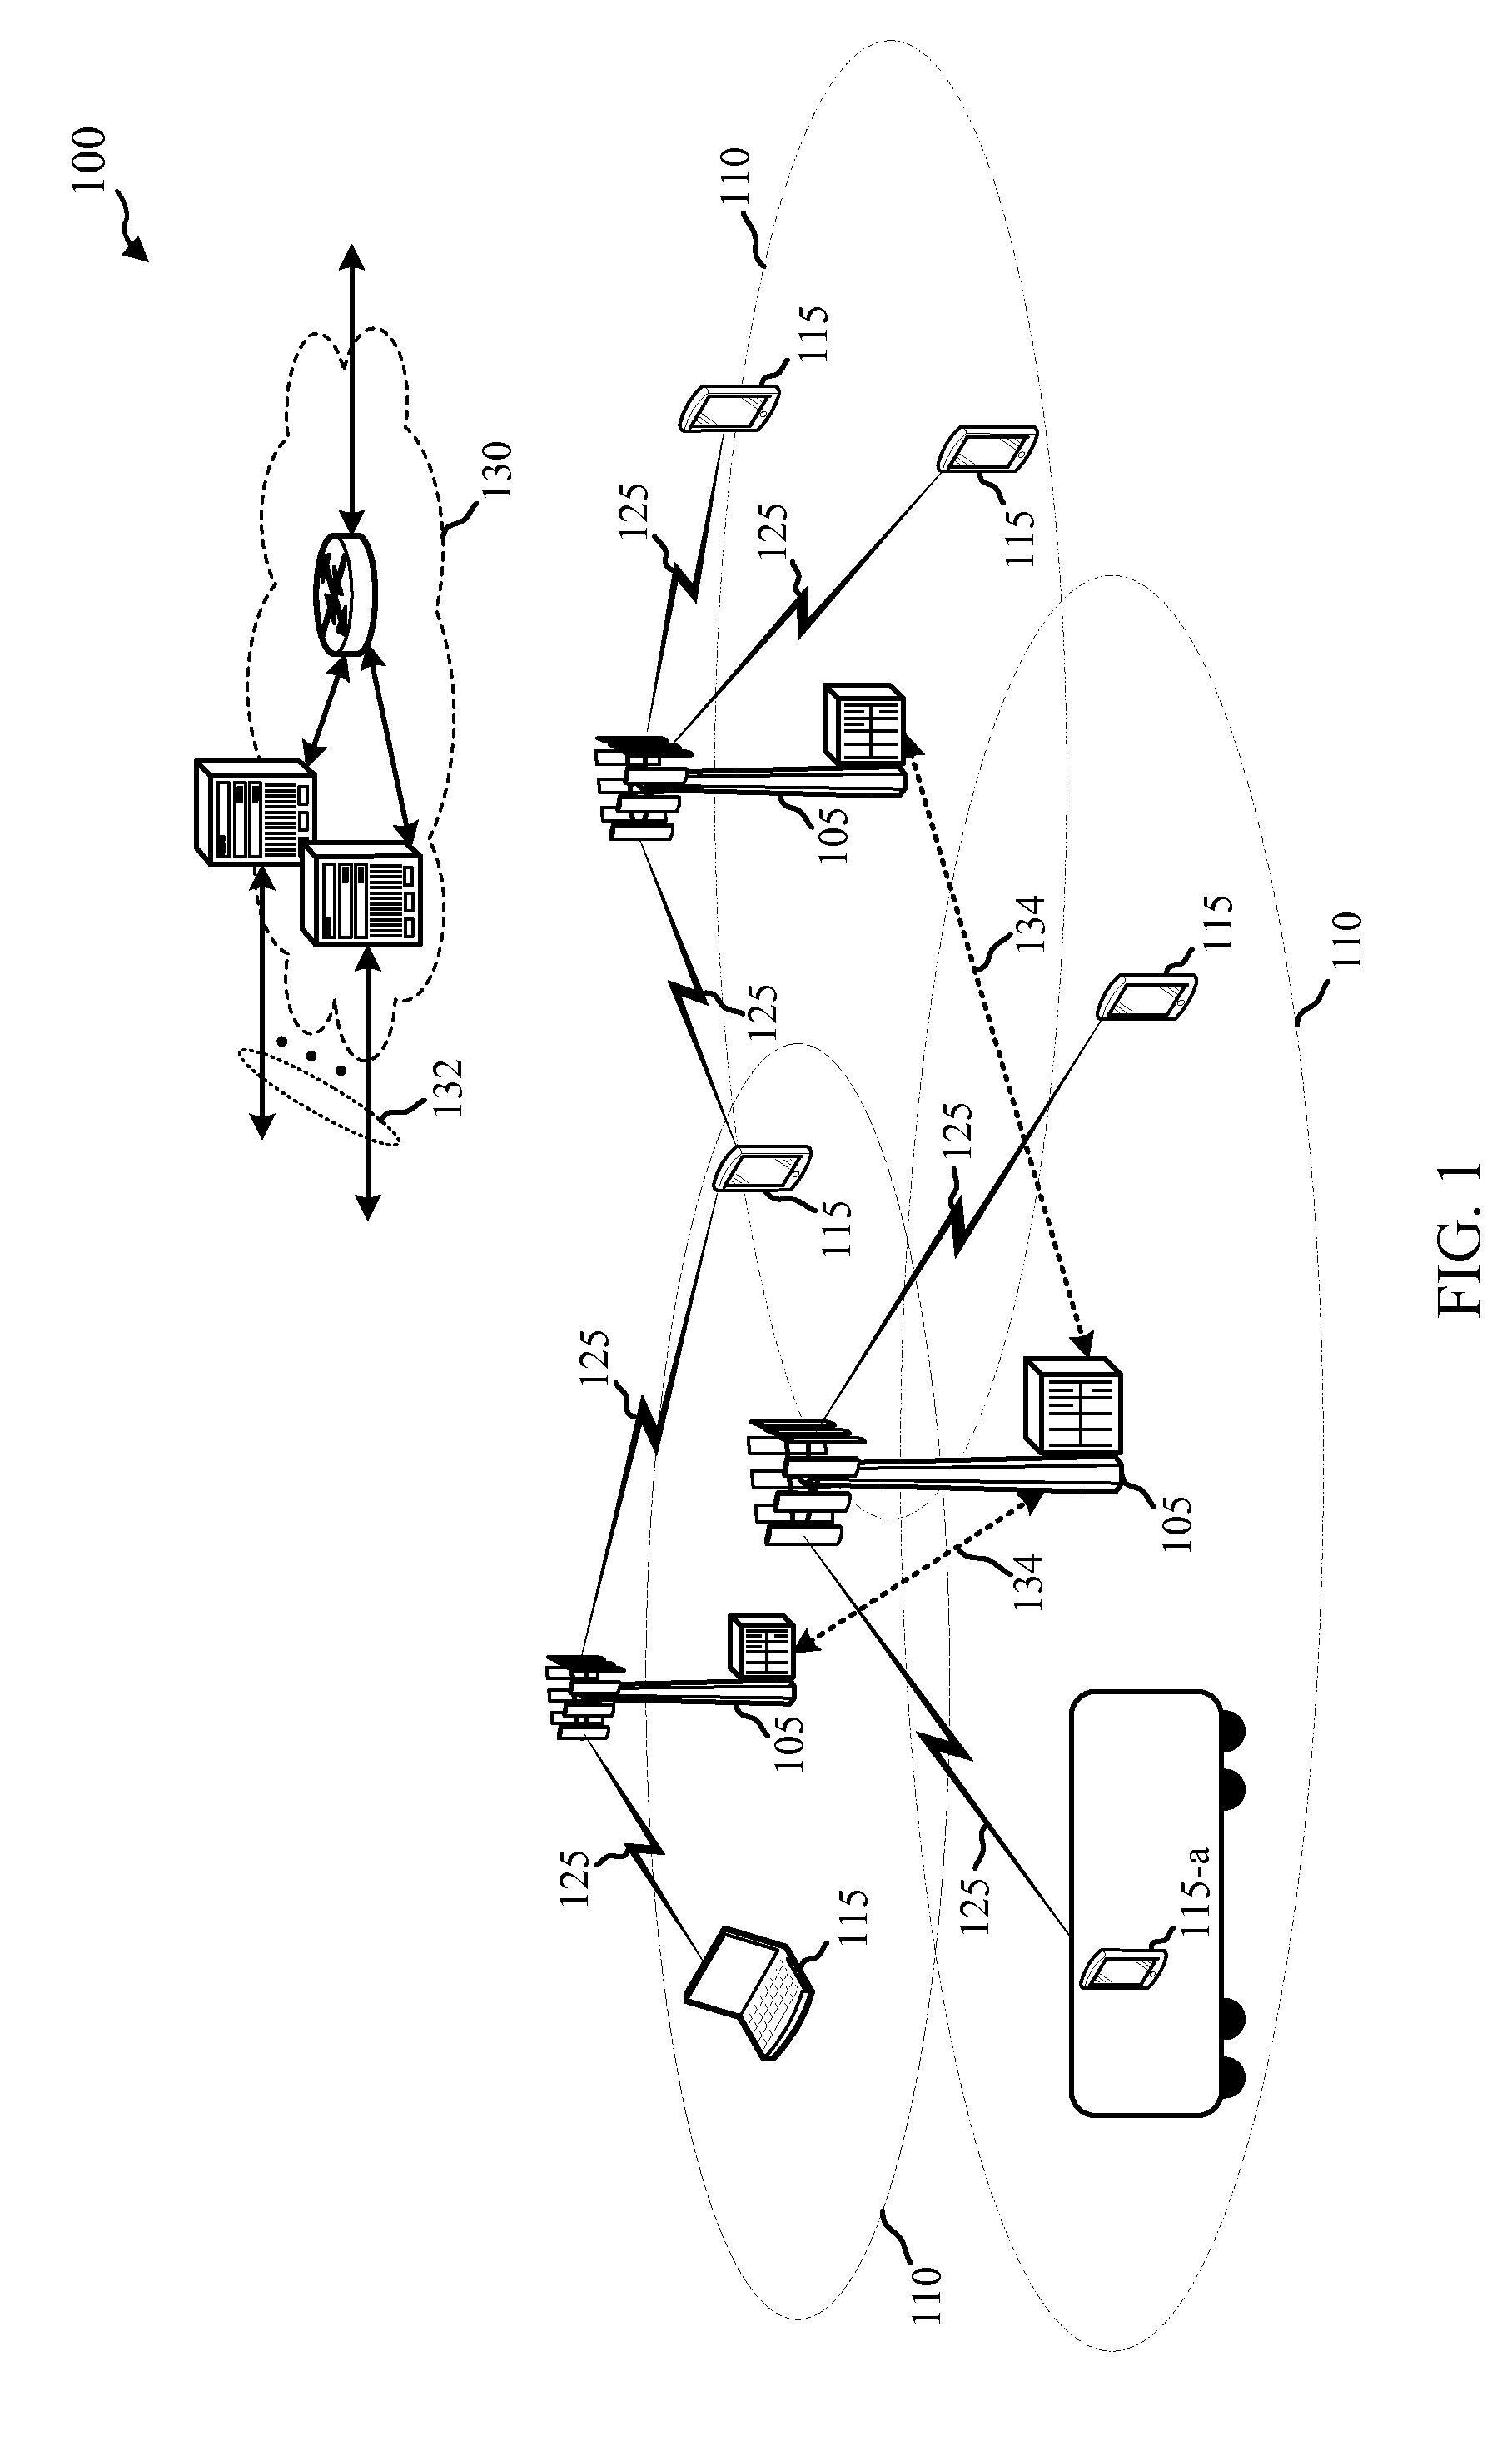 Using known geographical information in directional wireless communication systems